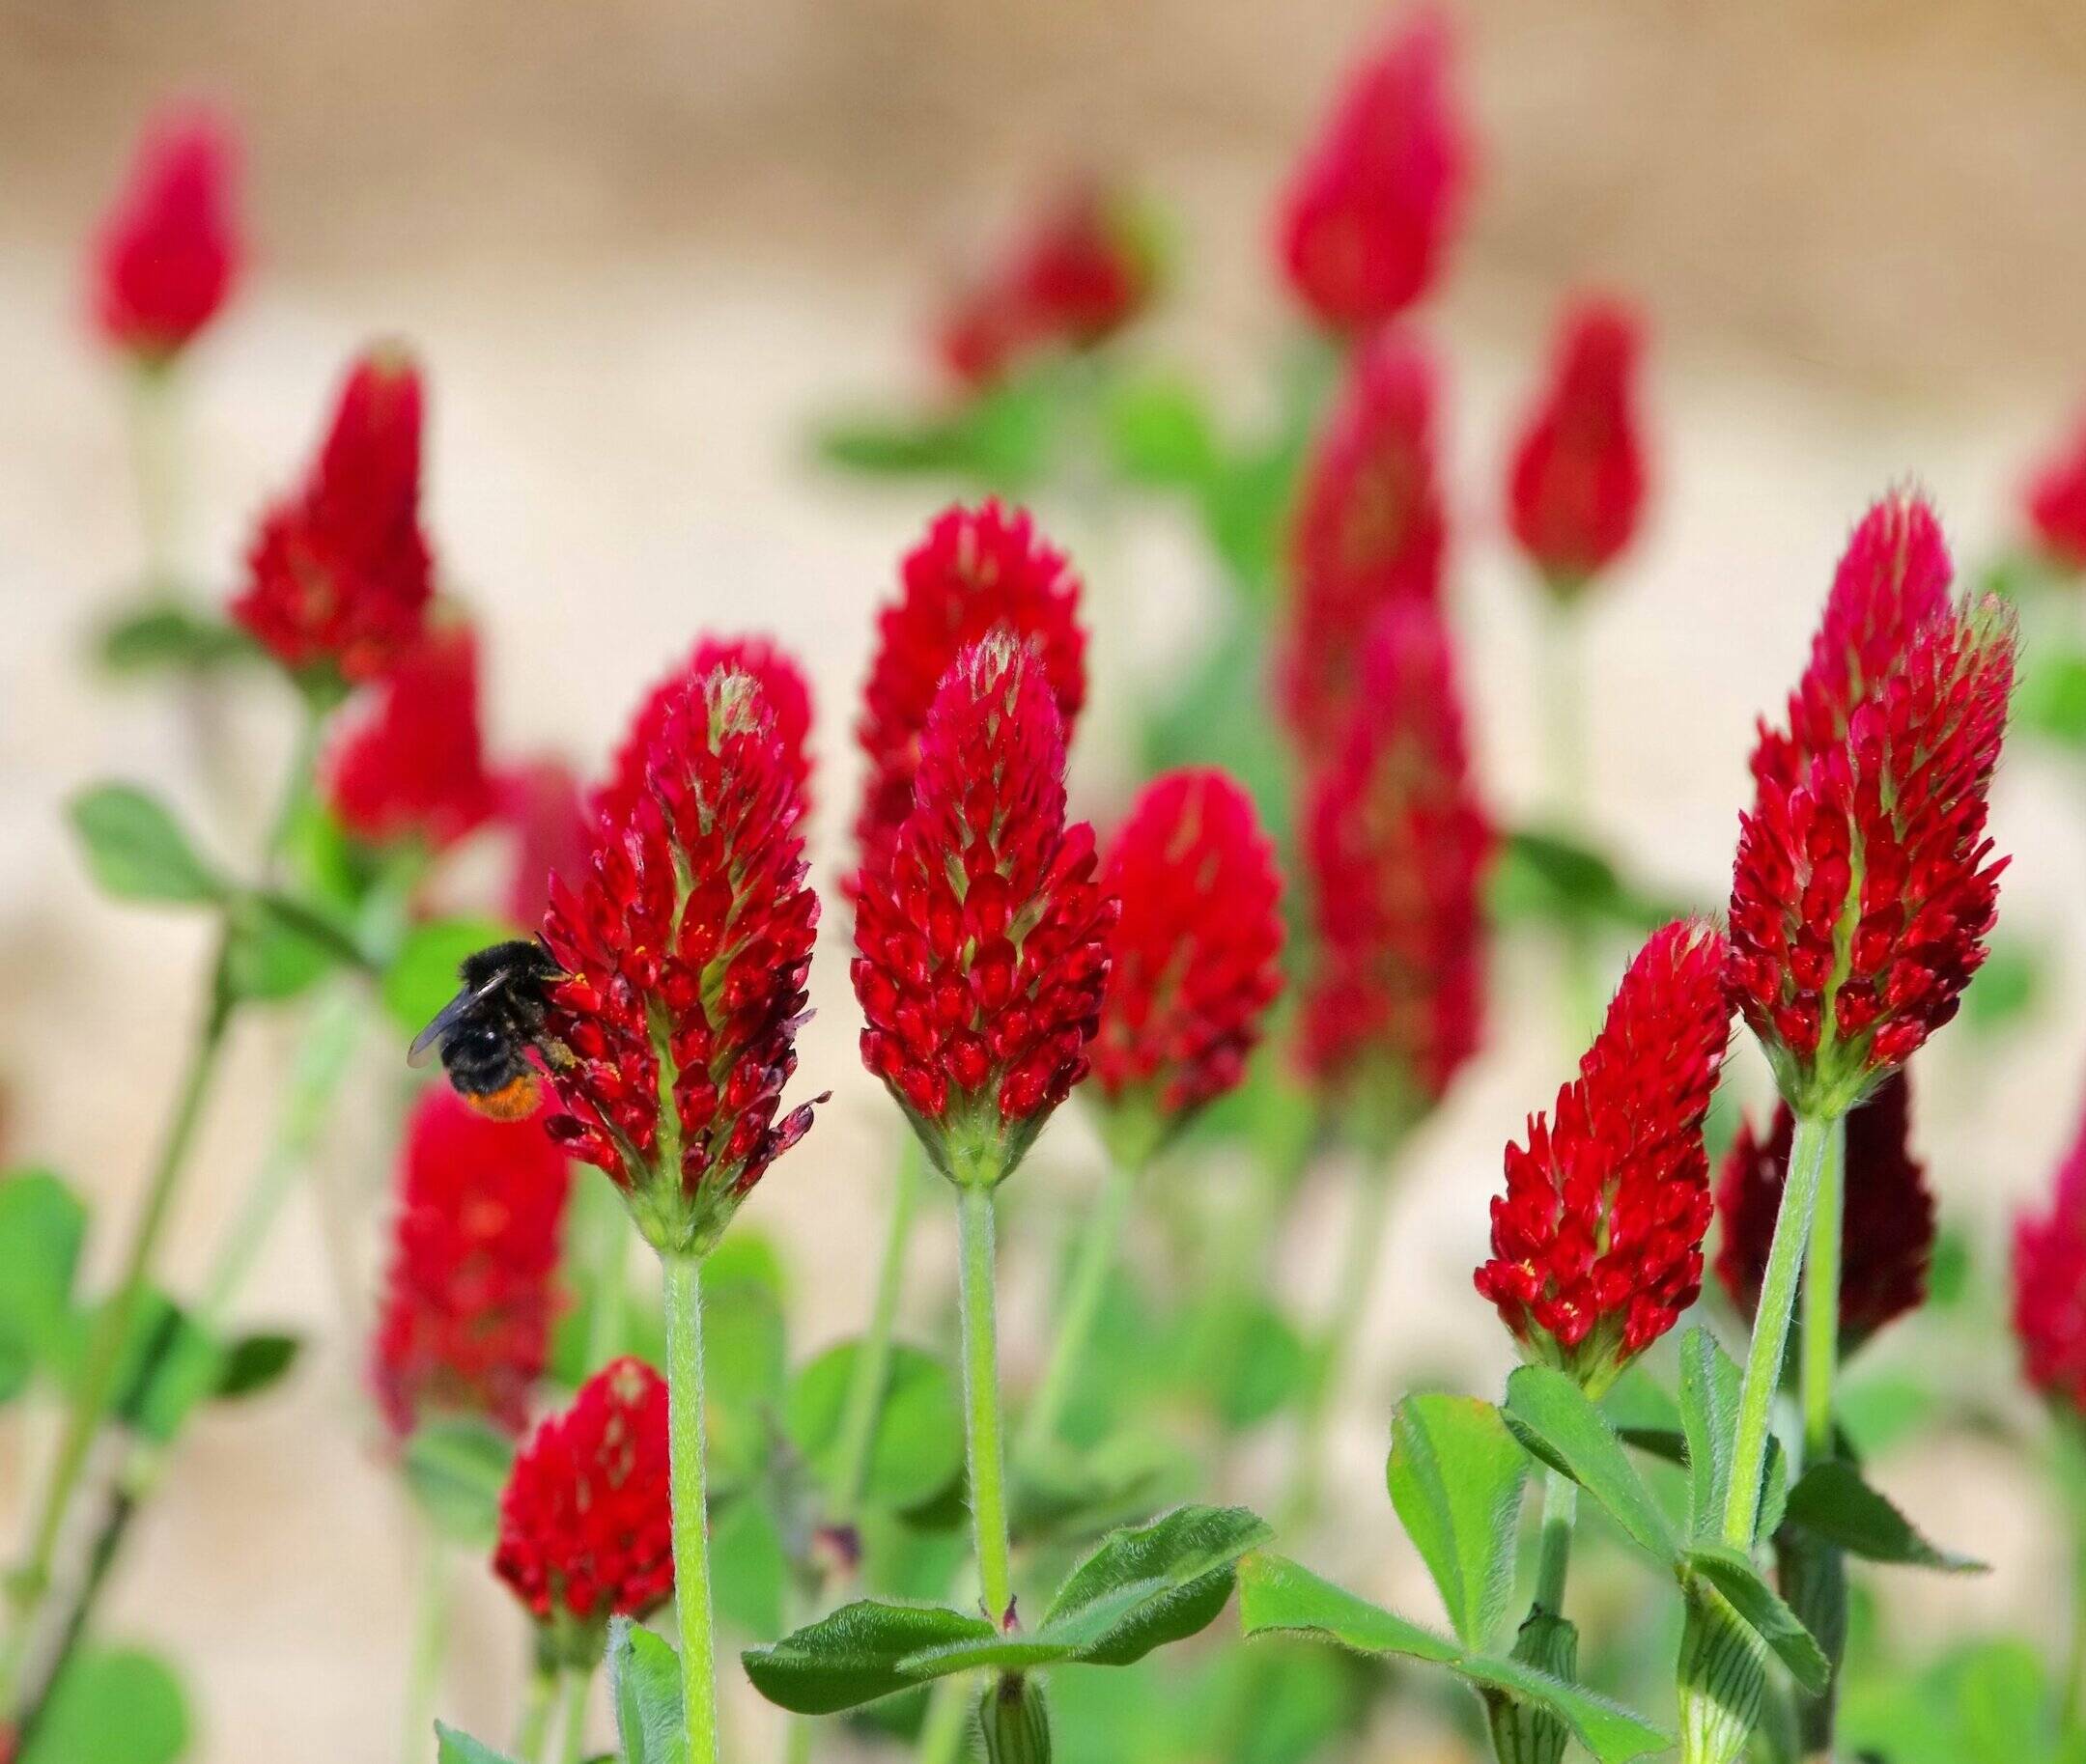 How To Plant Red Clover Seed